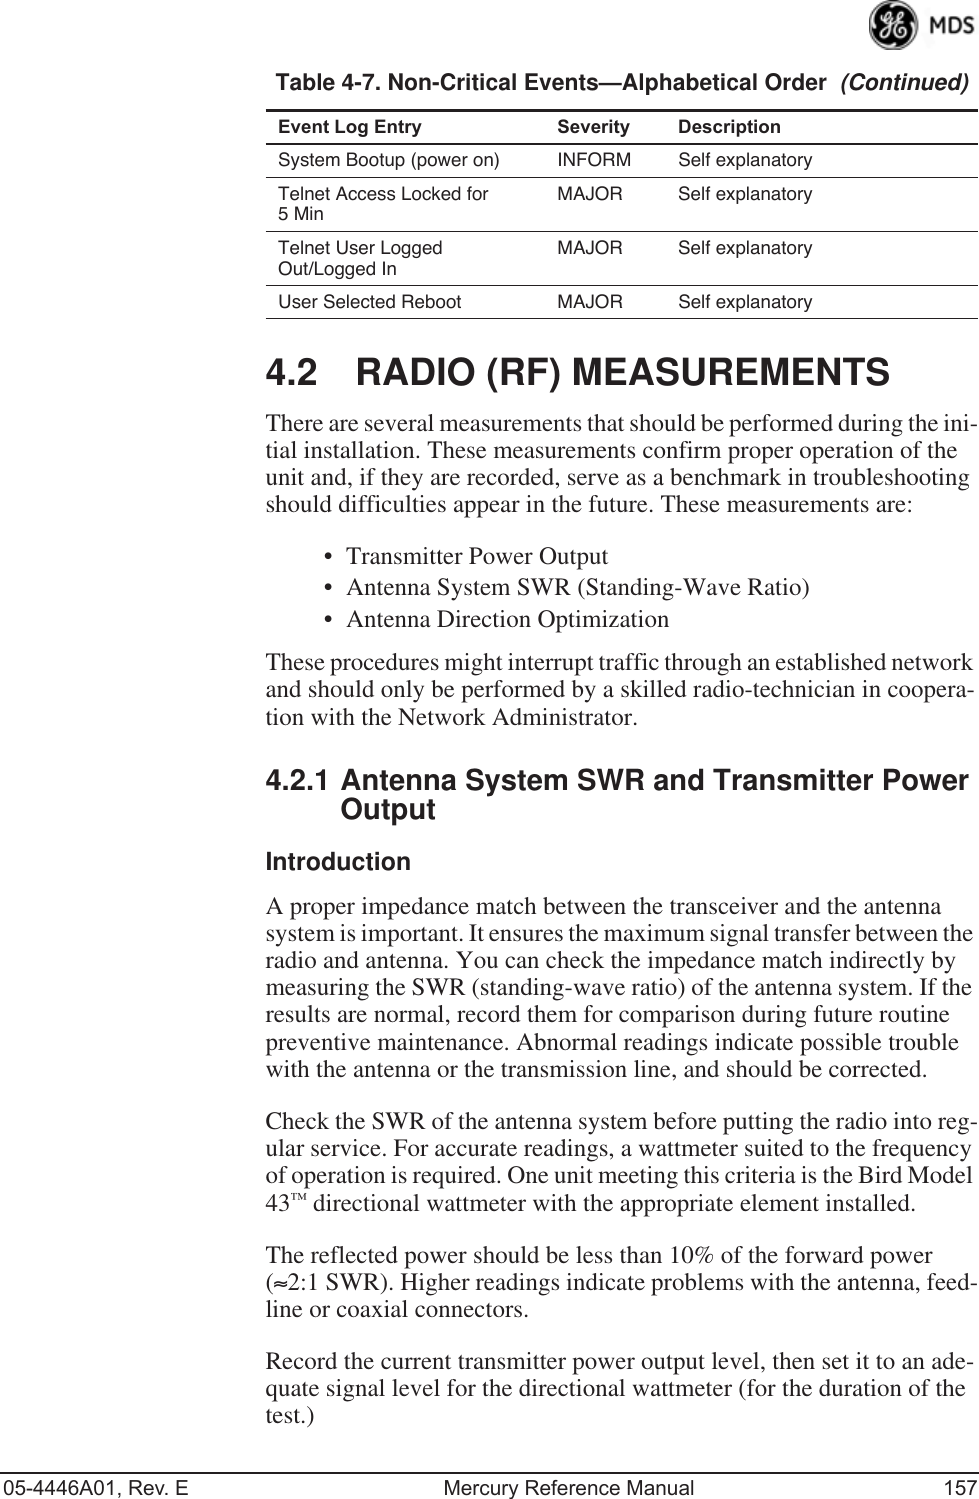 05-4446A01, Rev. E Mercury Reference Manual 1574.2 RADIO (RF) MEASUREMENTSThere are several measurements that should be performed during the ini-tial installation. These measurements confirm proper operation of the unit and, if they are recorded, serve as a benchmark in troubleshooting should difficulties appear in the future. These measurements are:• Transmitter Power Output• Antenna System SWR (Standing-Wave Ratio)• Antenna Direction OptimizationThese procedures might interrupt traffic through an established network and should only be performed by a skilled radio-technician in coopera-tion with the Network Administrator.4.2.1 Antenna System SWR and Transmitter Power OutputIntroductionA proper impedance match between the transceiver and the antenna system is important. It ensures the maximum signal transfer between the radio and antenna. You can check the impedance match indirectly by measuring the SWR (standing-wave ratio) of the antenna system. If the results are normal, record them for comparison during future routine preventive maintenance. Abnormal readings indicate possible trouble with the antenna or the transmission line, and should be corrected.Check the SWR of the antenna system before putting the radio into reg-ular service. For accurate readings, a wattmeter suited to the frequency of operation is required. One unit meeting this criteria is the Bird Model 43™ directional wattmeter with the appropriate element installed.The reflected power should be less than 10% of the forward power (≈2:1 SWR). Higher readings indicate problems with the antenna, feed-line or coaxial connectors.Record the current transmitter power output level, then set it to an ade-quate signal level for the directional wattmeter (for the duration of the test.)System Bootup (power on) INFORM Self explanatoryTelnet Access Locked for 5 MinMAJOR Self explanatoryTelnet User Logged Out/Logged InMAJOR Self explanatoryUser Selected Reboot MAJOR Self explanatoryTable 4-7. Non-Critical Events—Alphabetical Order  (Continued)Event Log Entry Severity Description